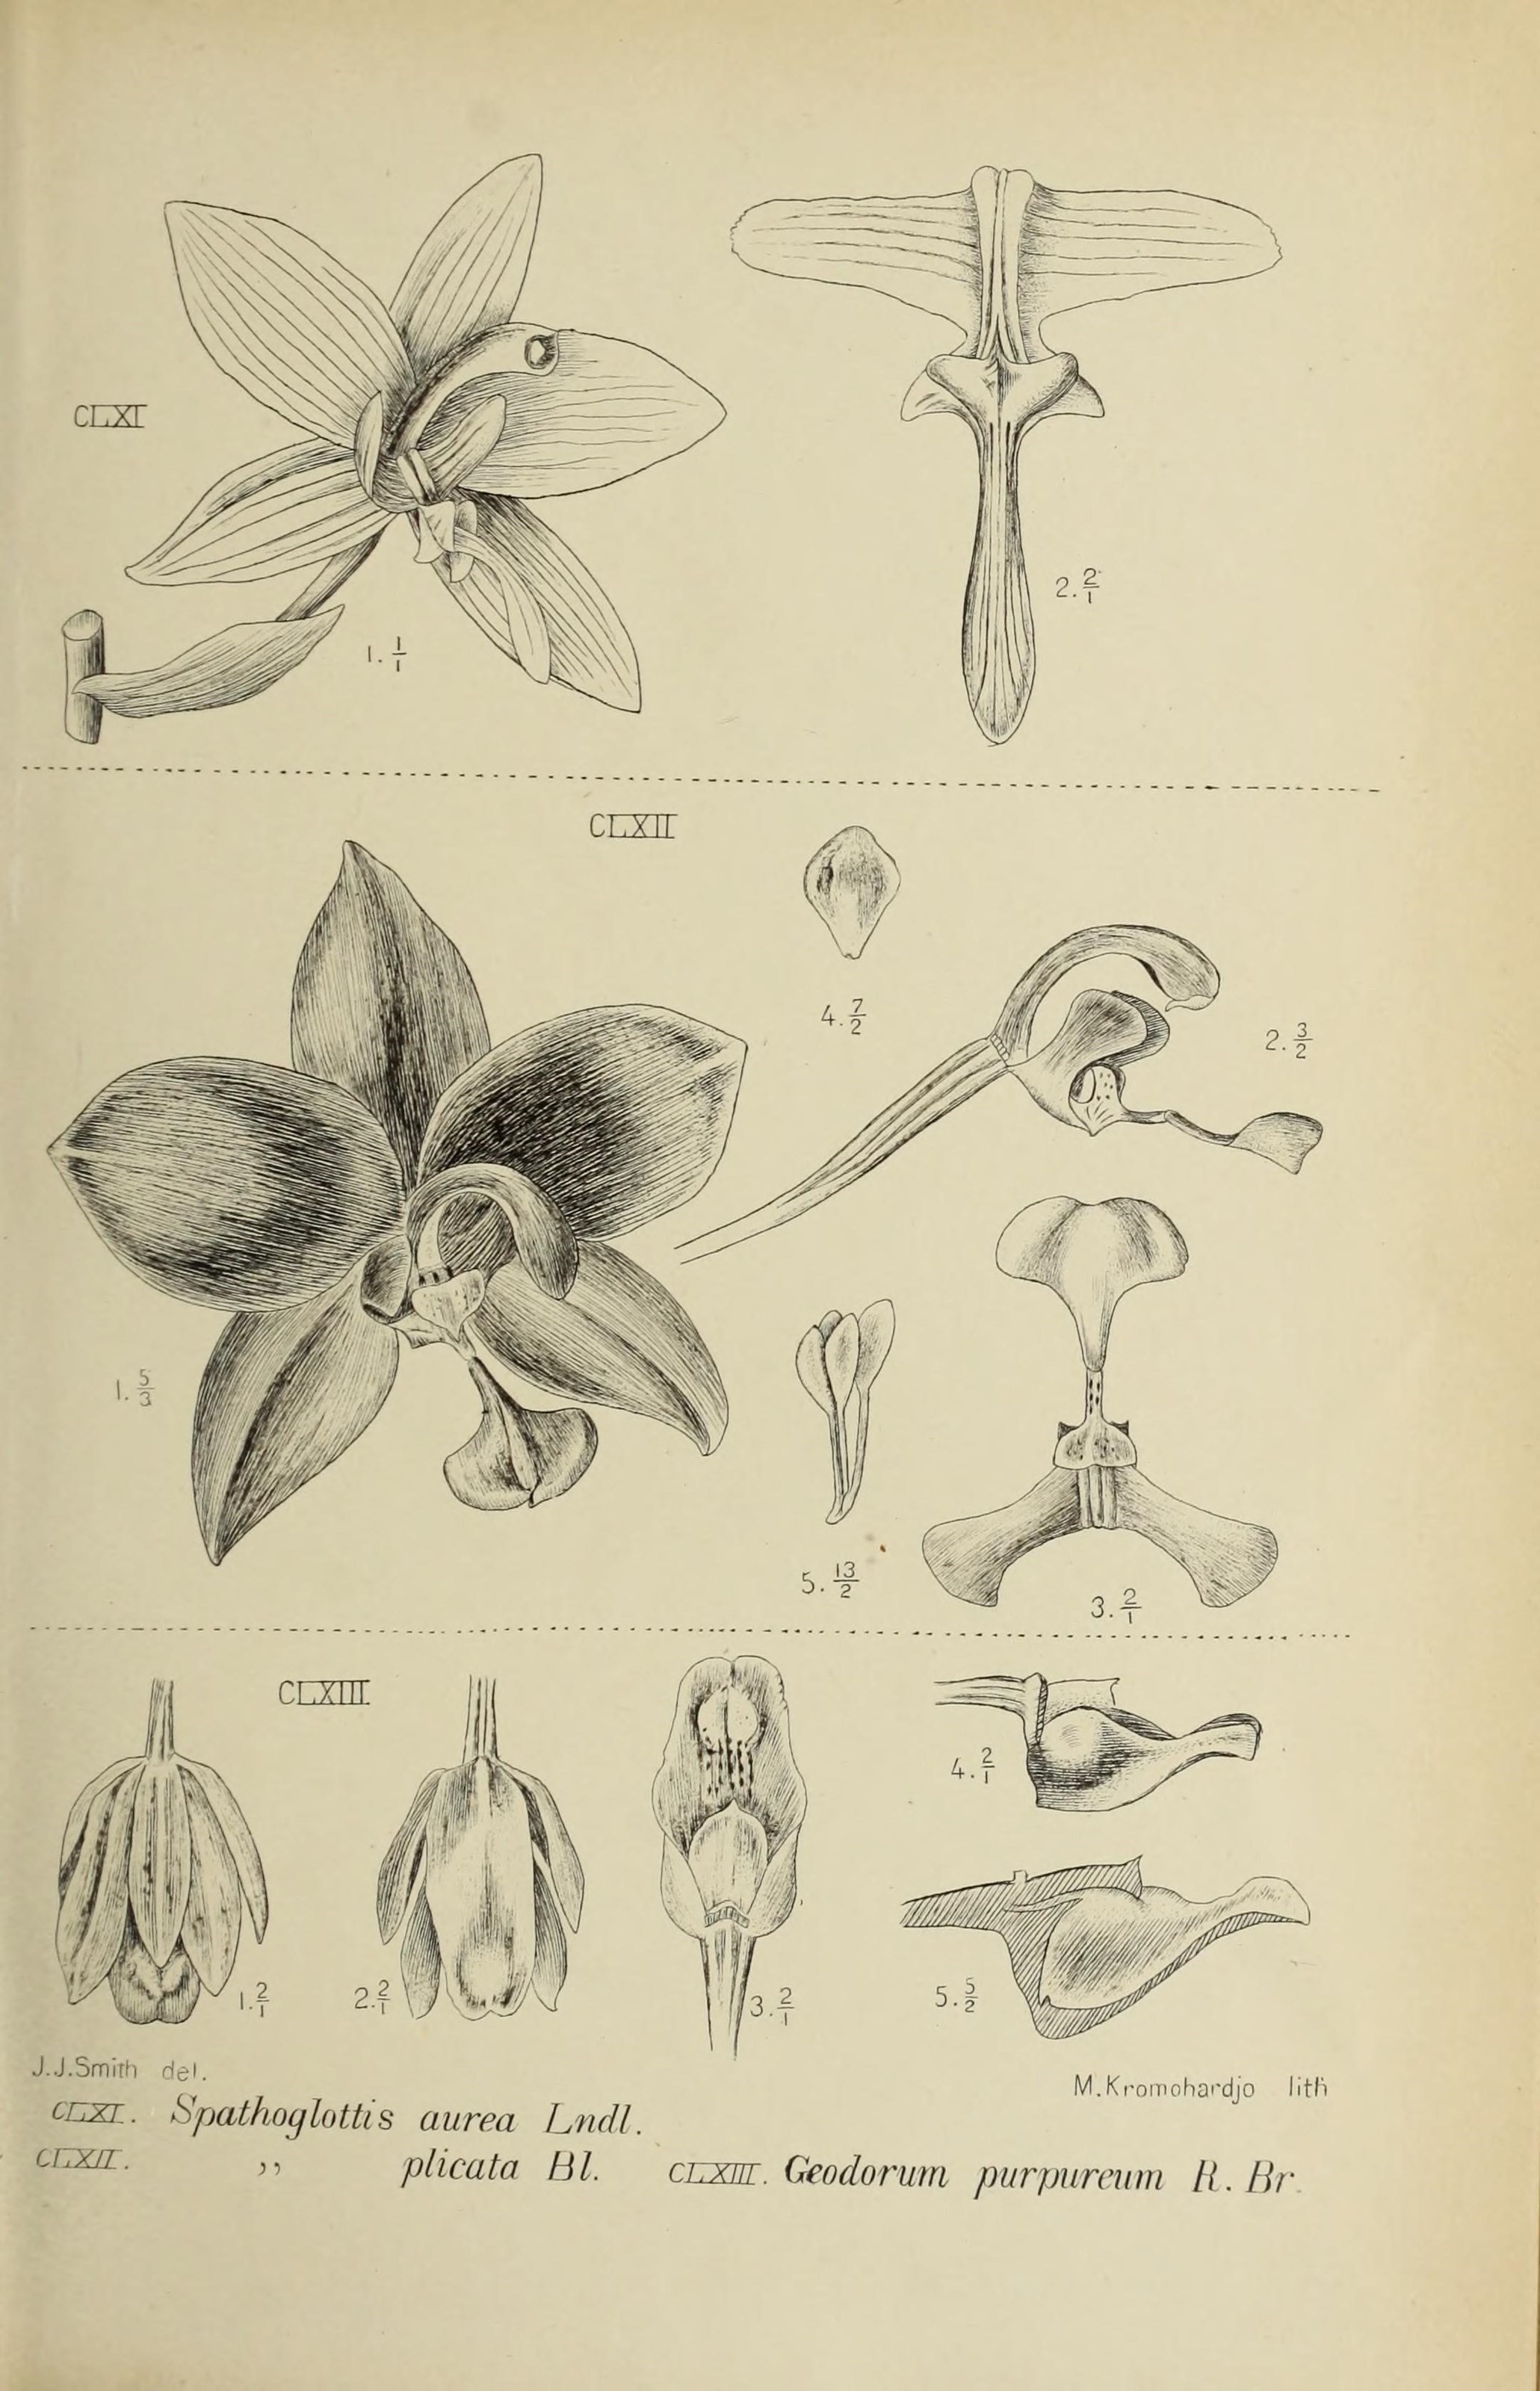 Ground Orchid Media Encyclopedia Of Life